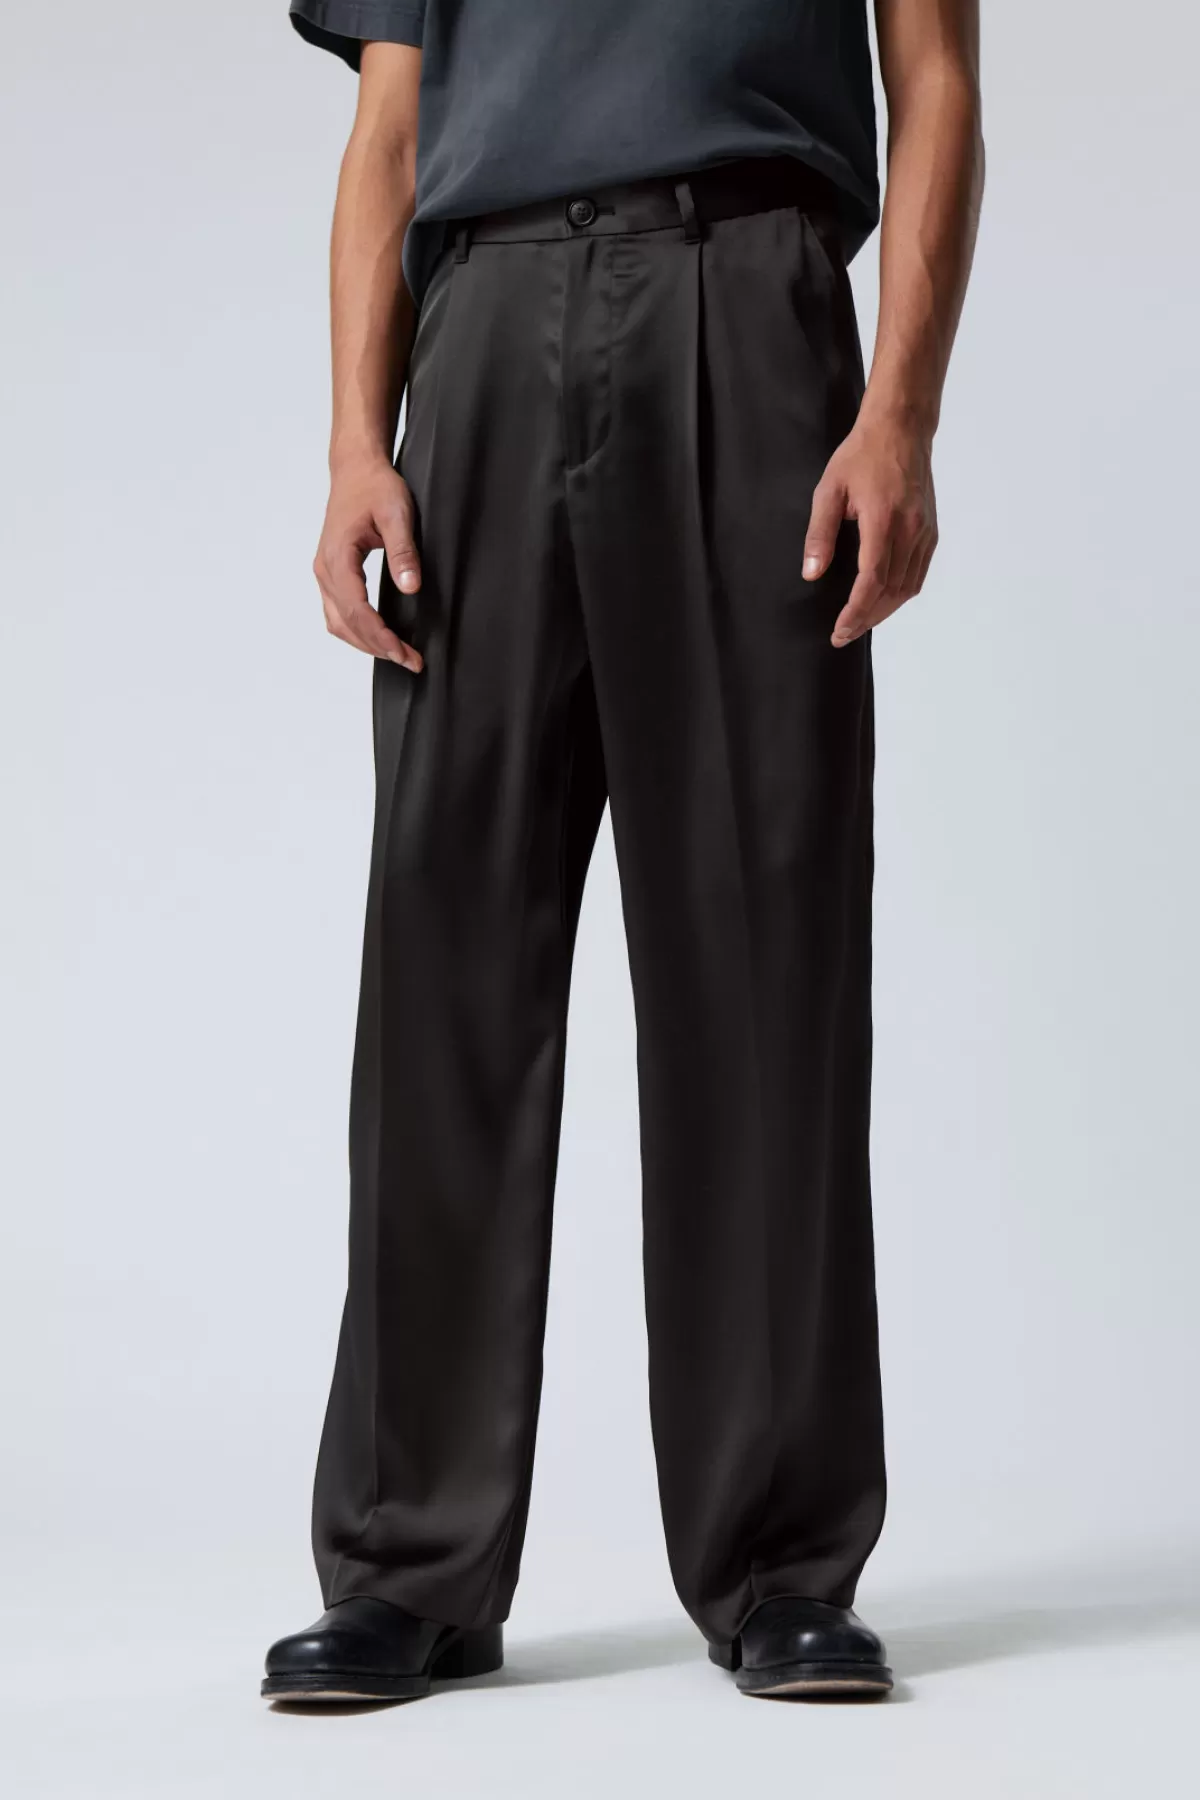 Weekday Uno Loose Shiny Trousers Black Hot